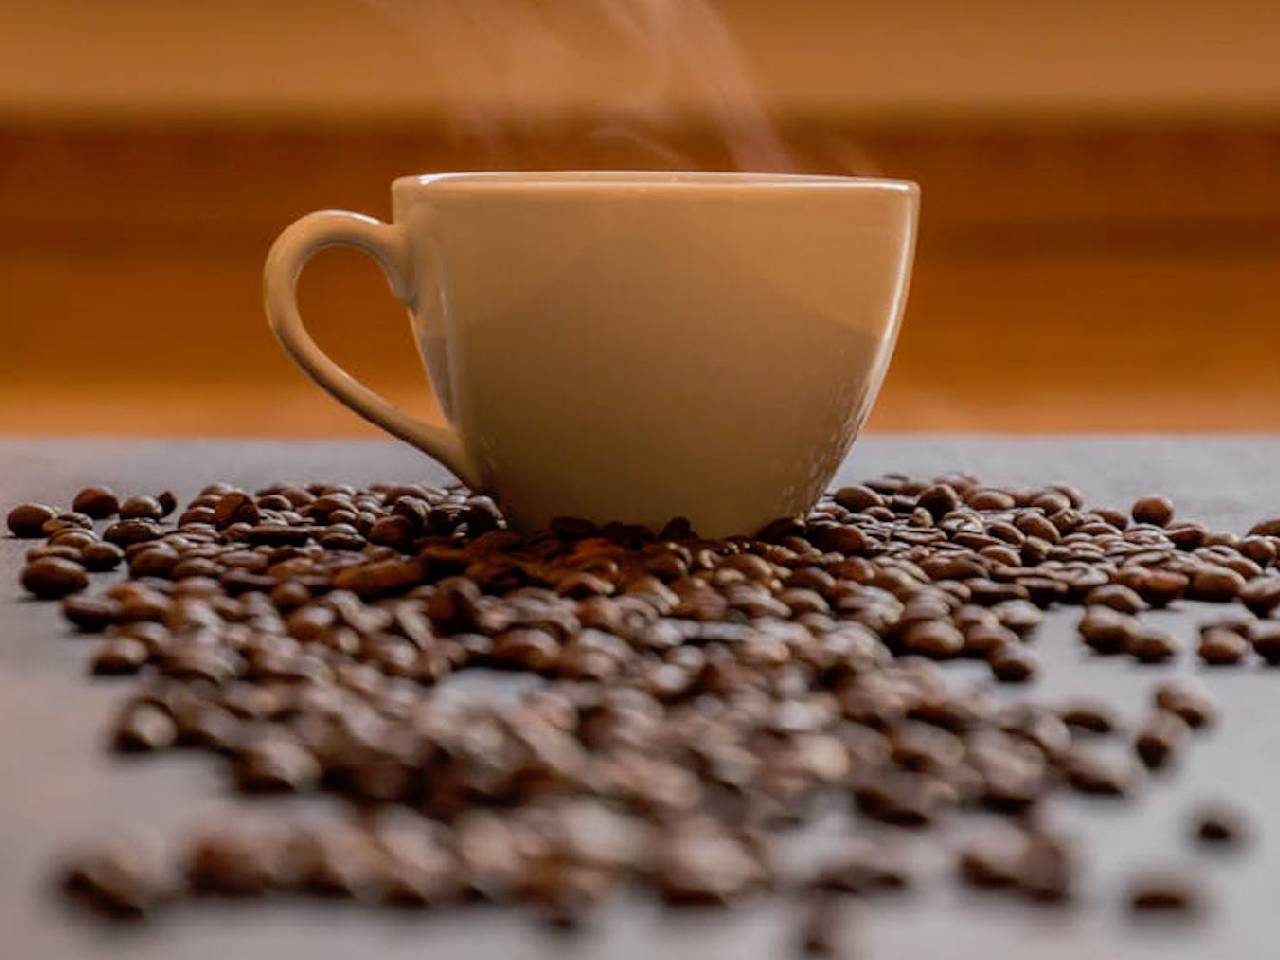 coffee cup surrounded by coffee beans